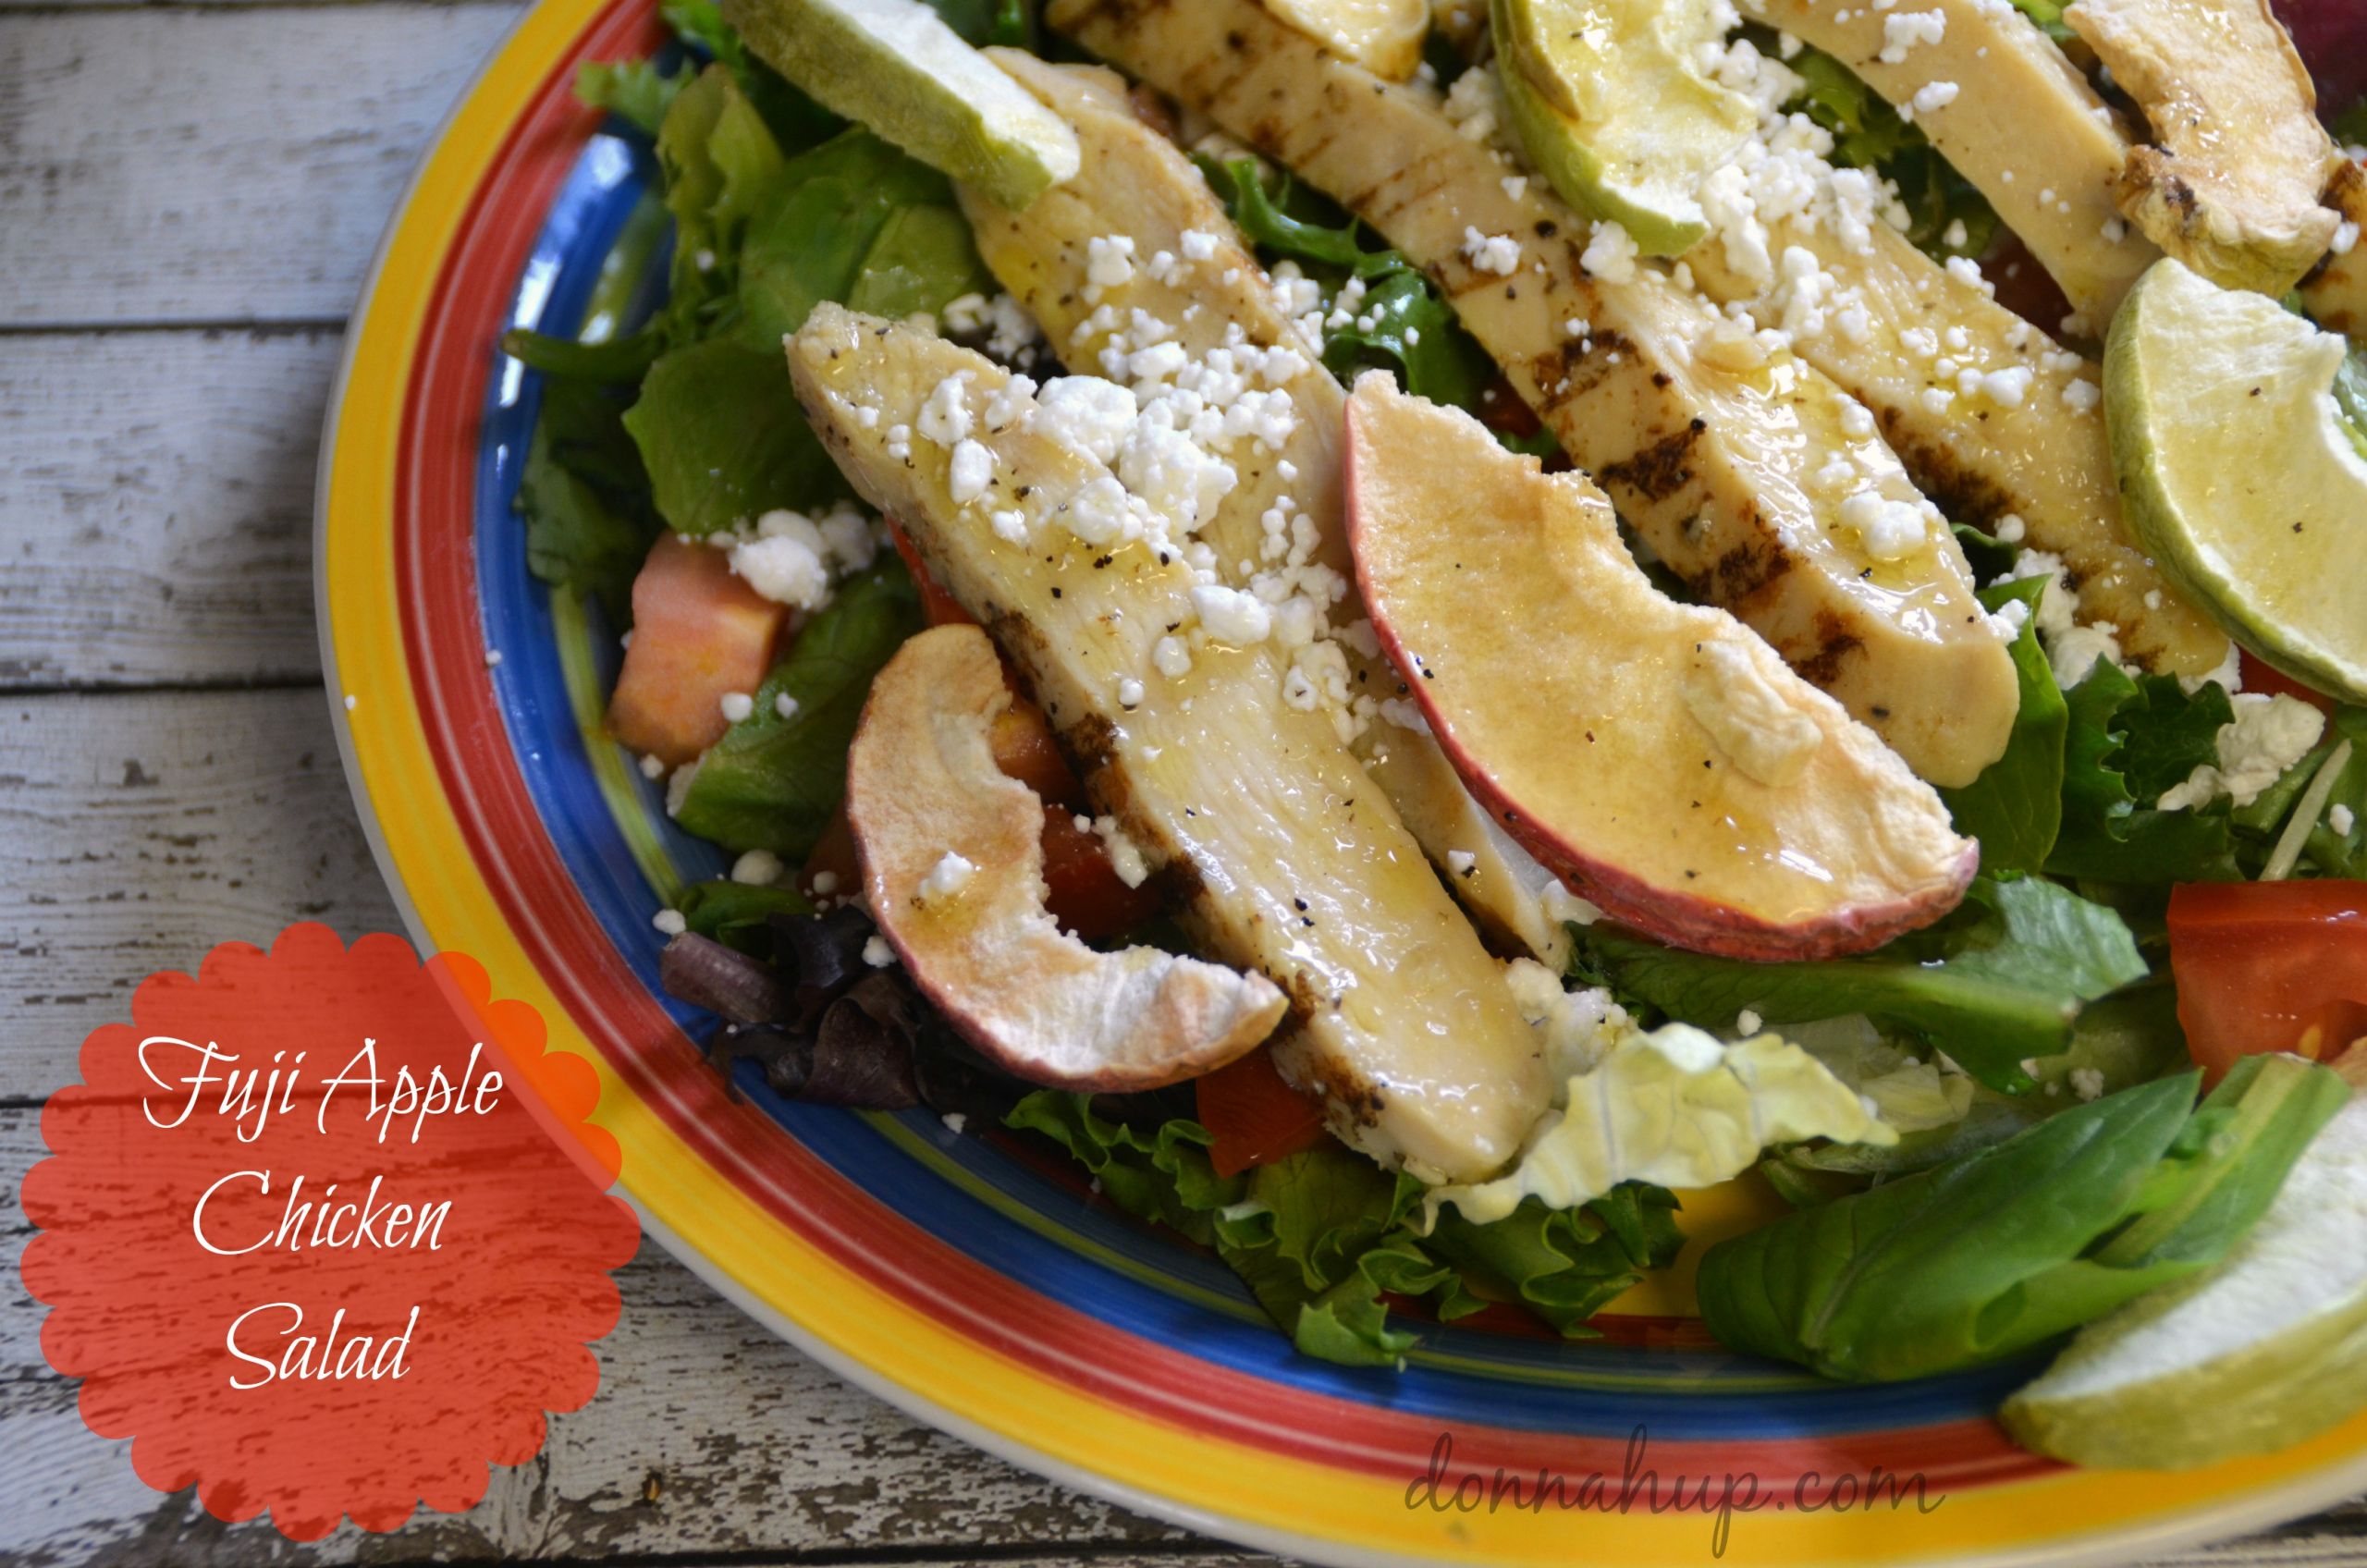 Fuji Apple Chicken Salad
 Fuji Apple Chicken Salad Recipe donnahup